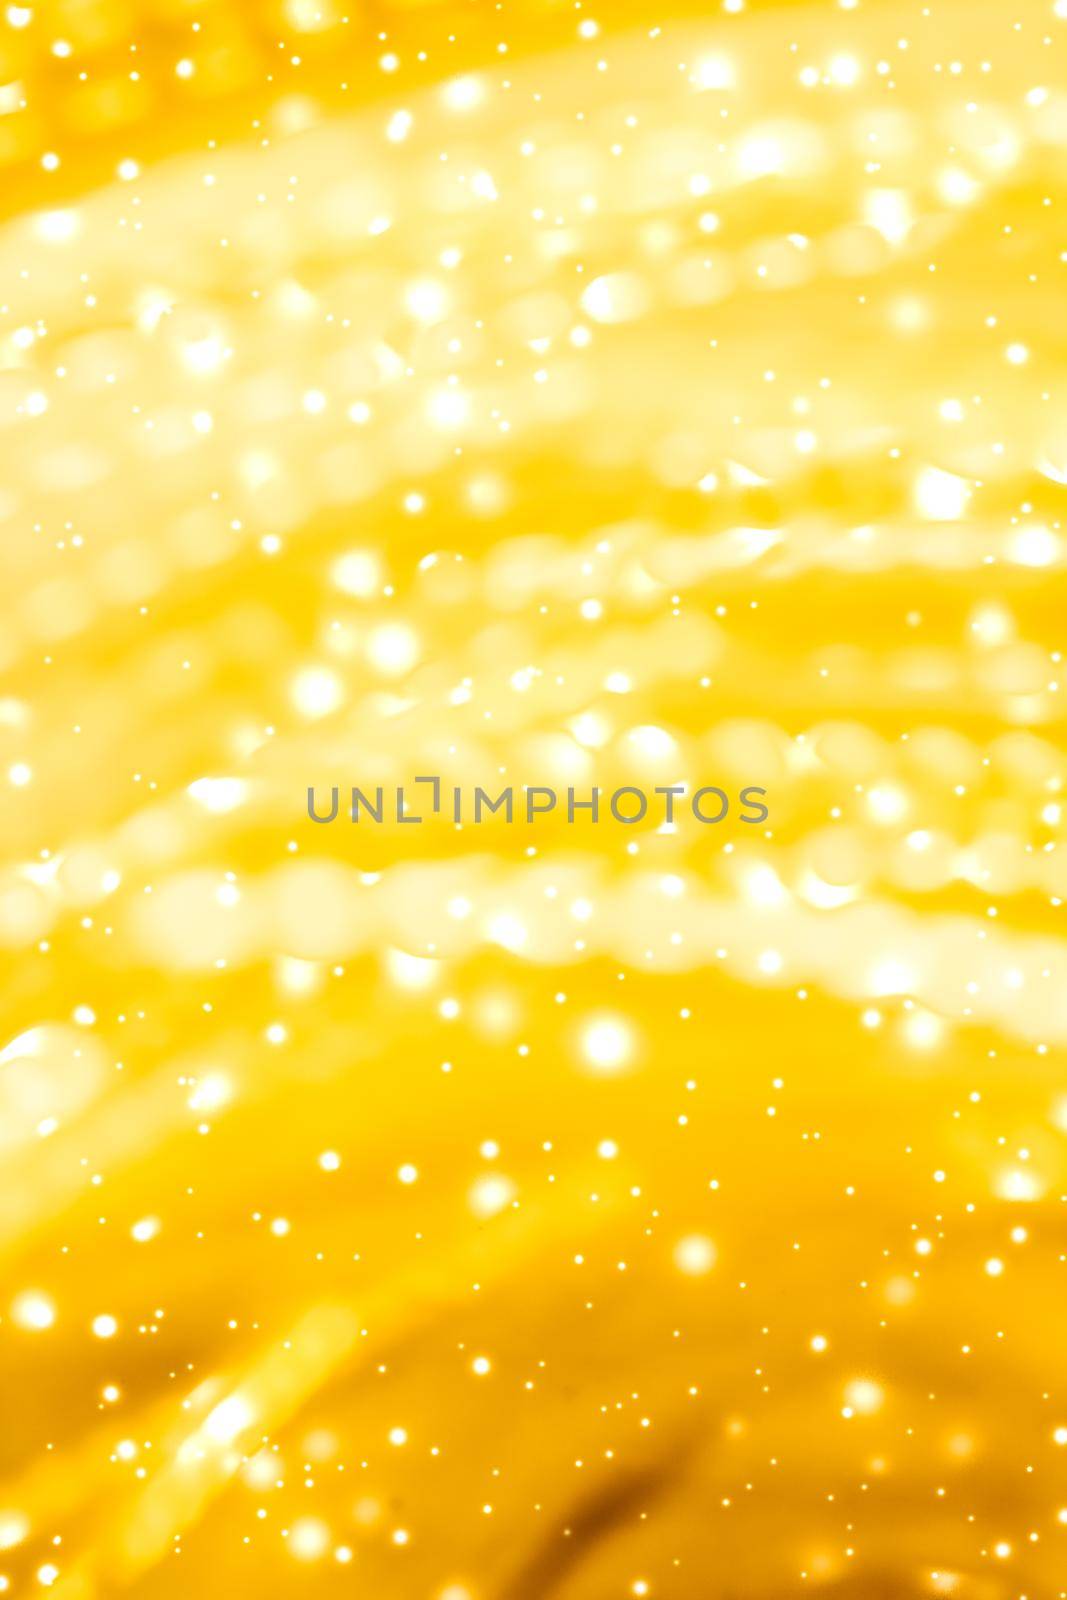 Golden Christmas lights, New Years Eve fireworks and abstract texture concept - Glamorous gold shiny glow and glitter, luxury holiday background